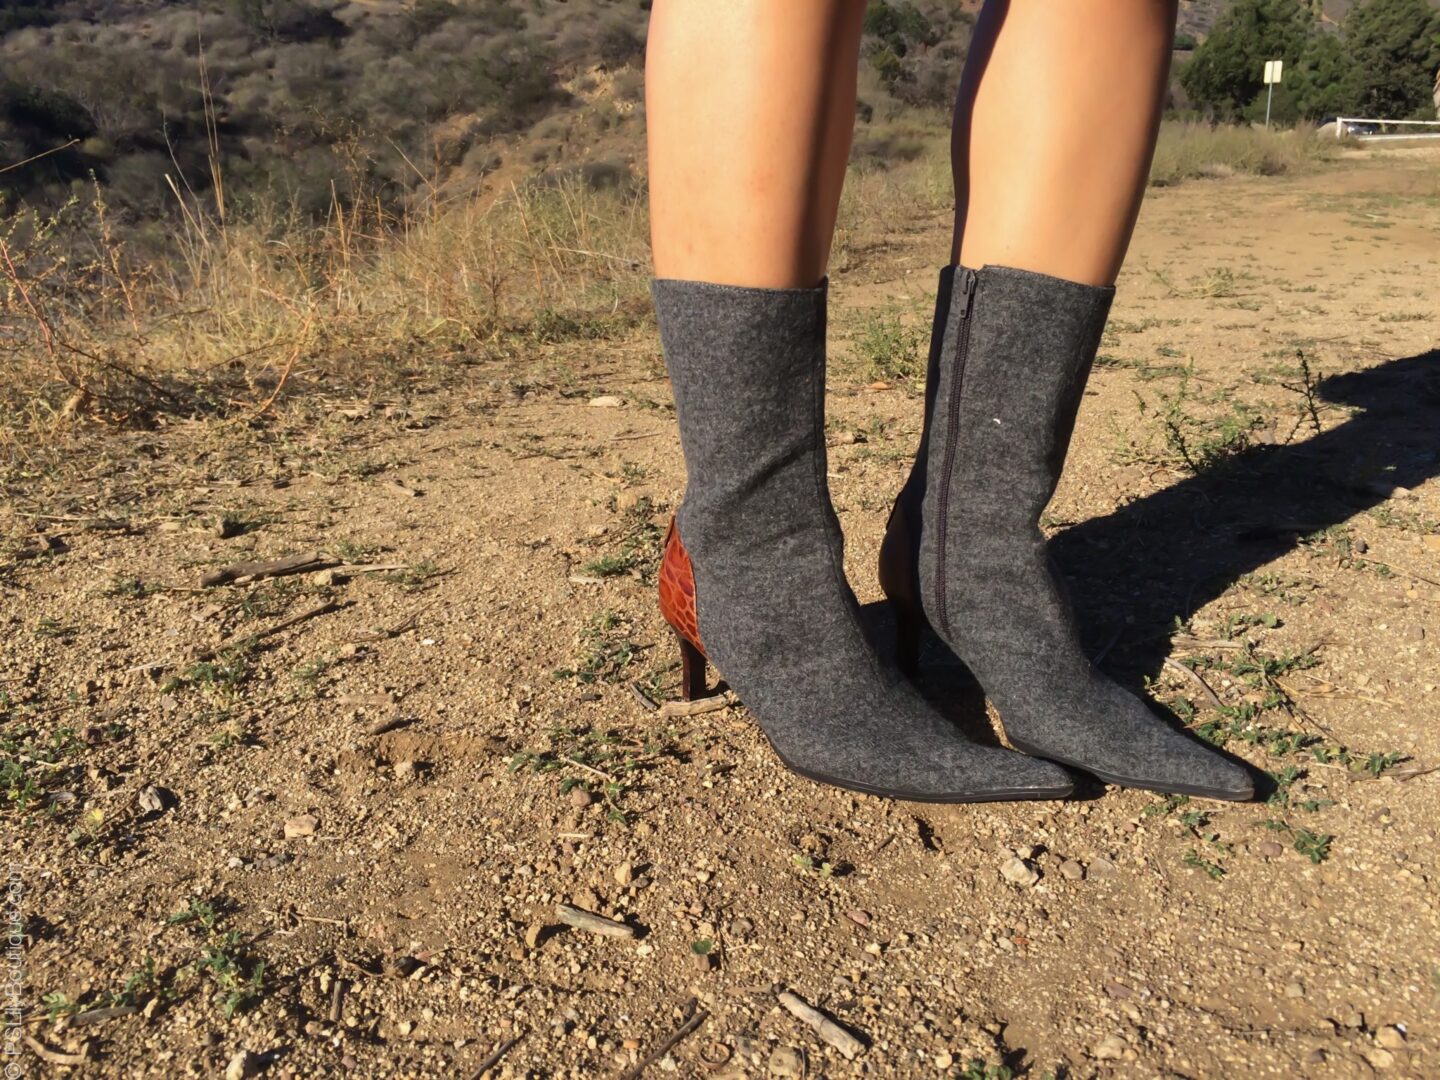 instagram-pslilyboutique-los-angeles-fashion-blogger-nine-west-gray-wool-leather-pointed-toe-boots-10-31-15